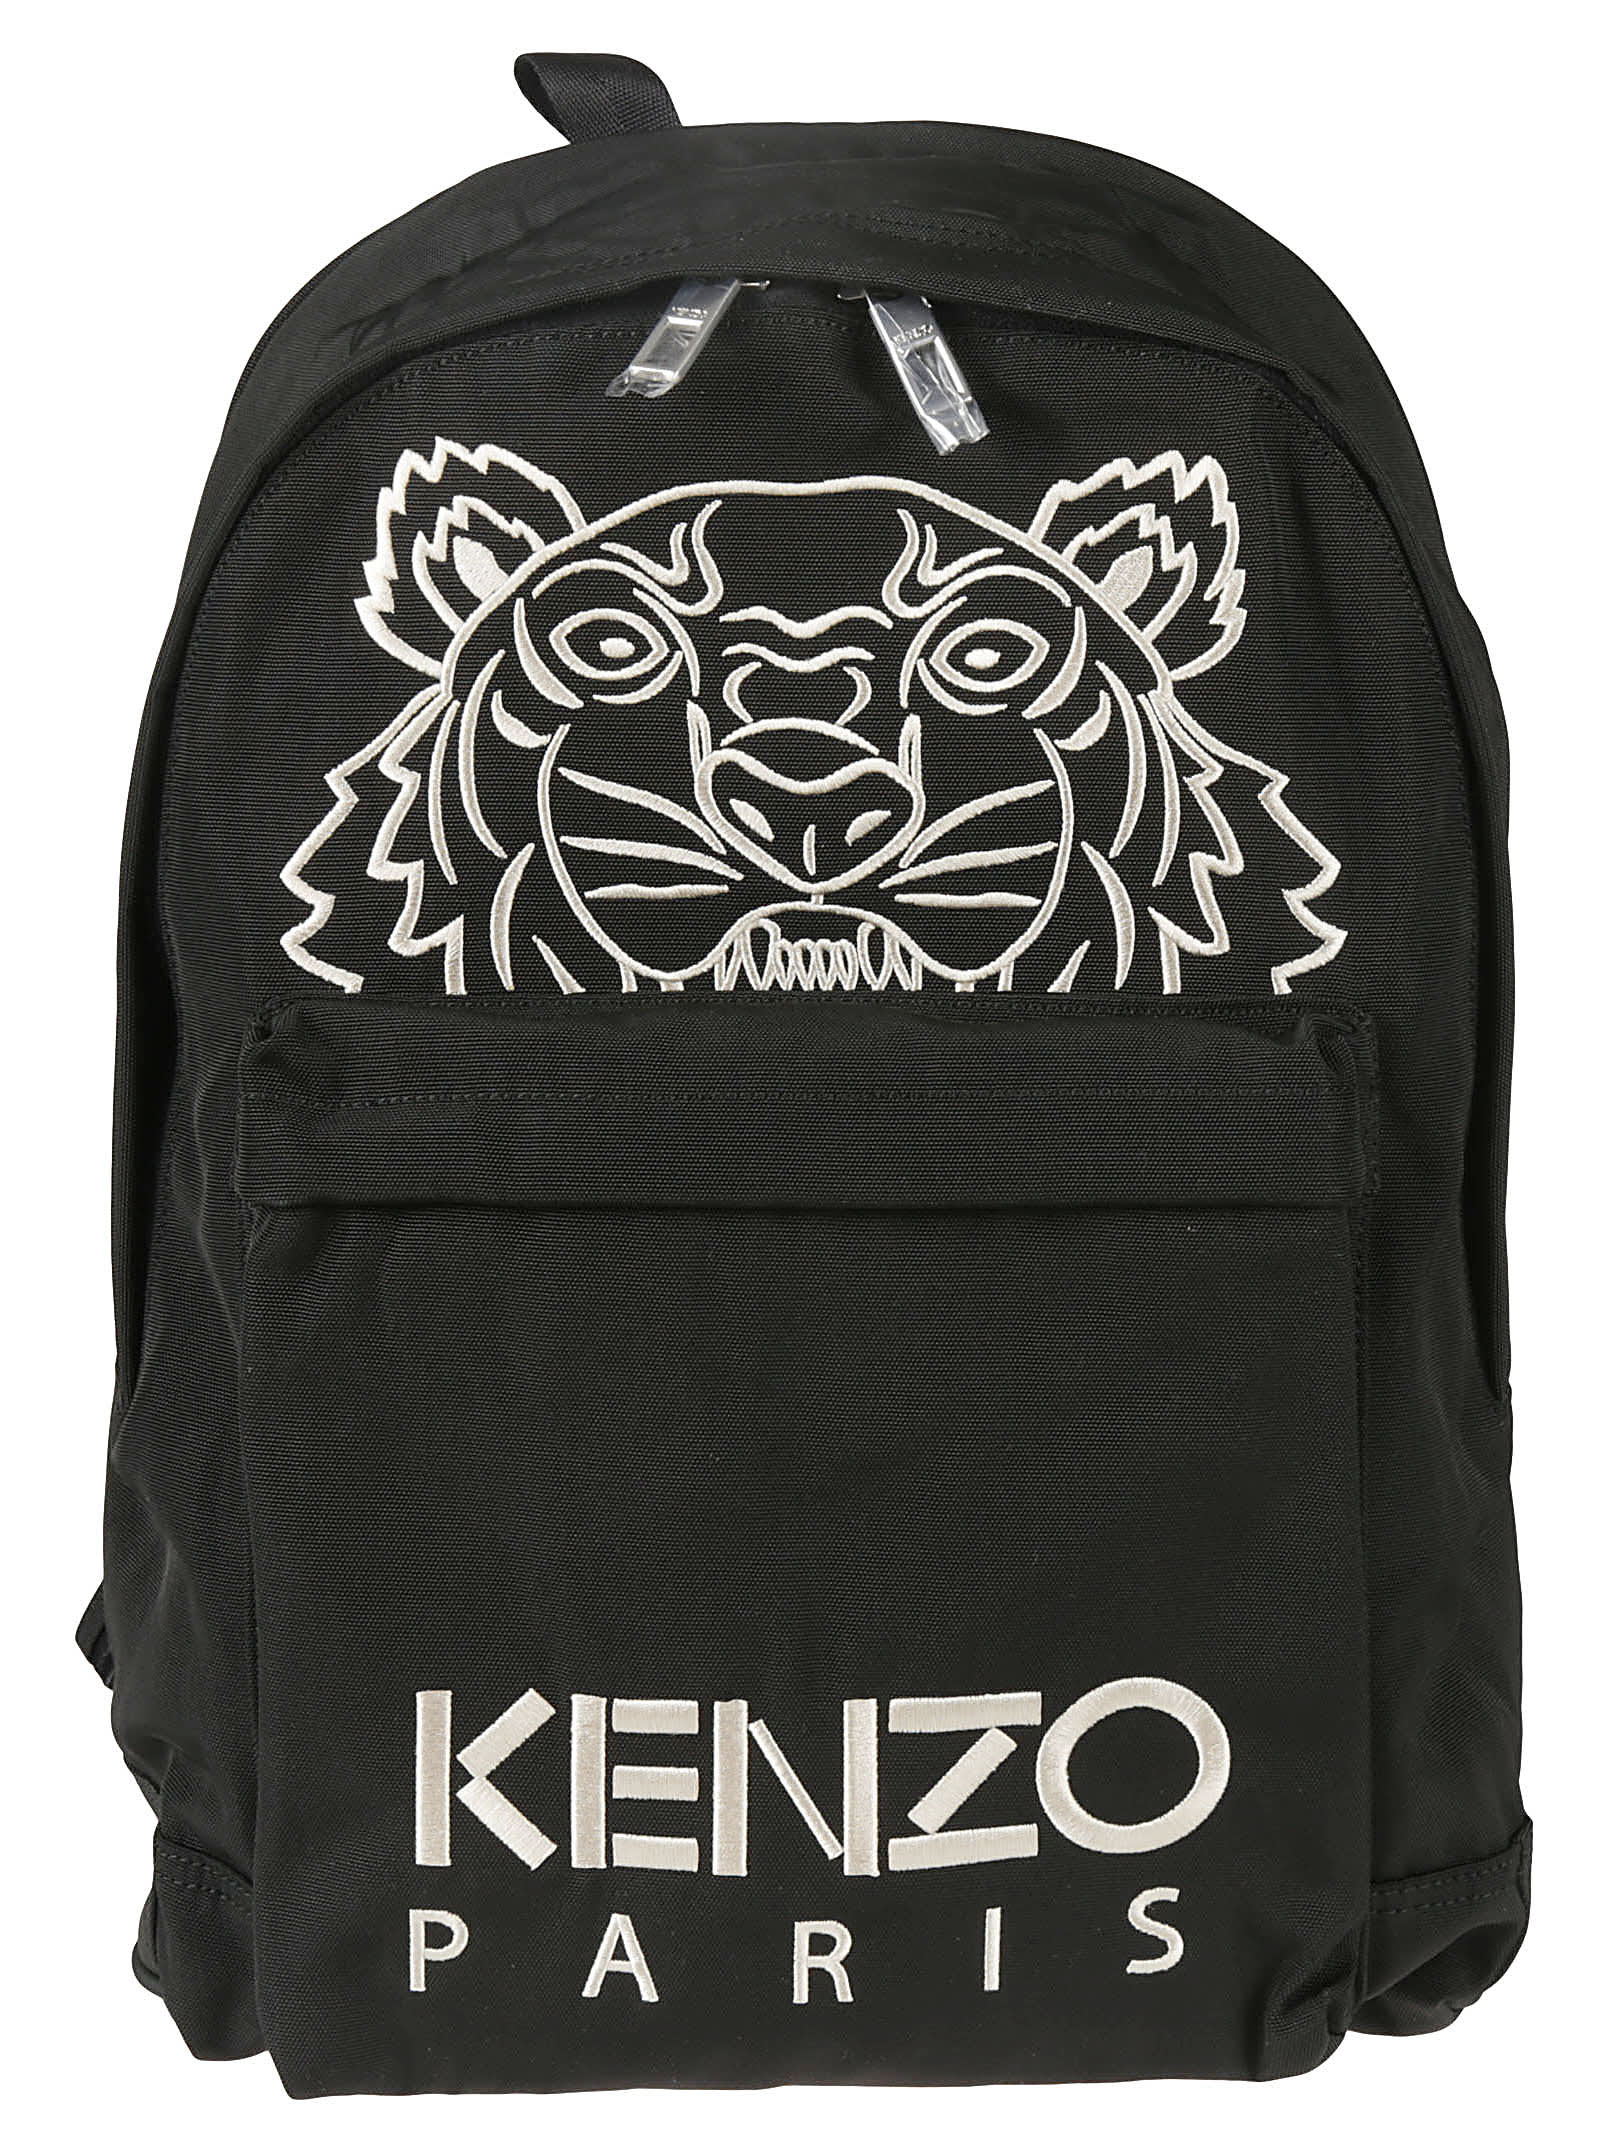 Kenzo Spring Embroidered Backpack